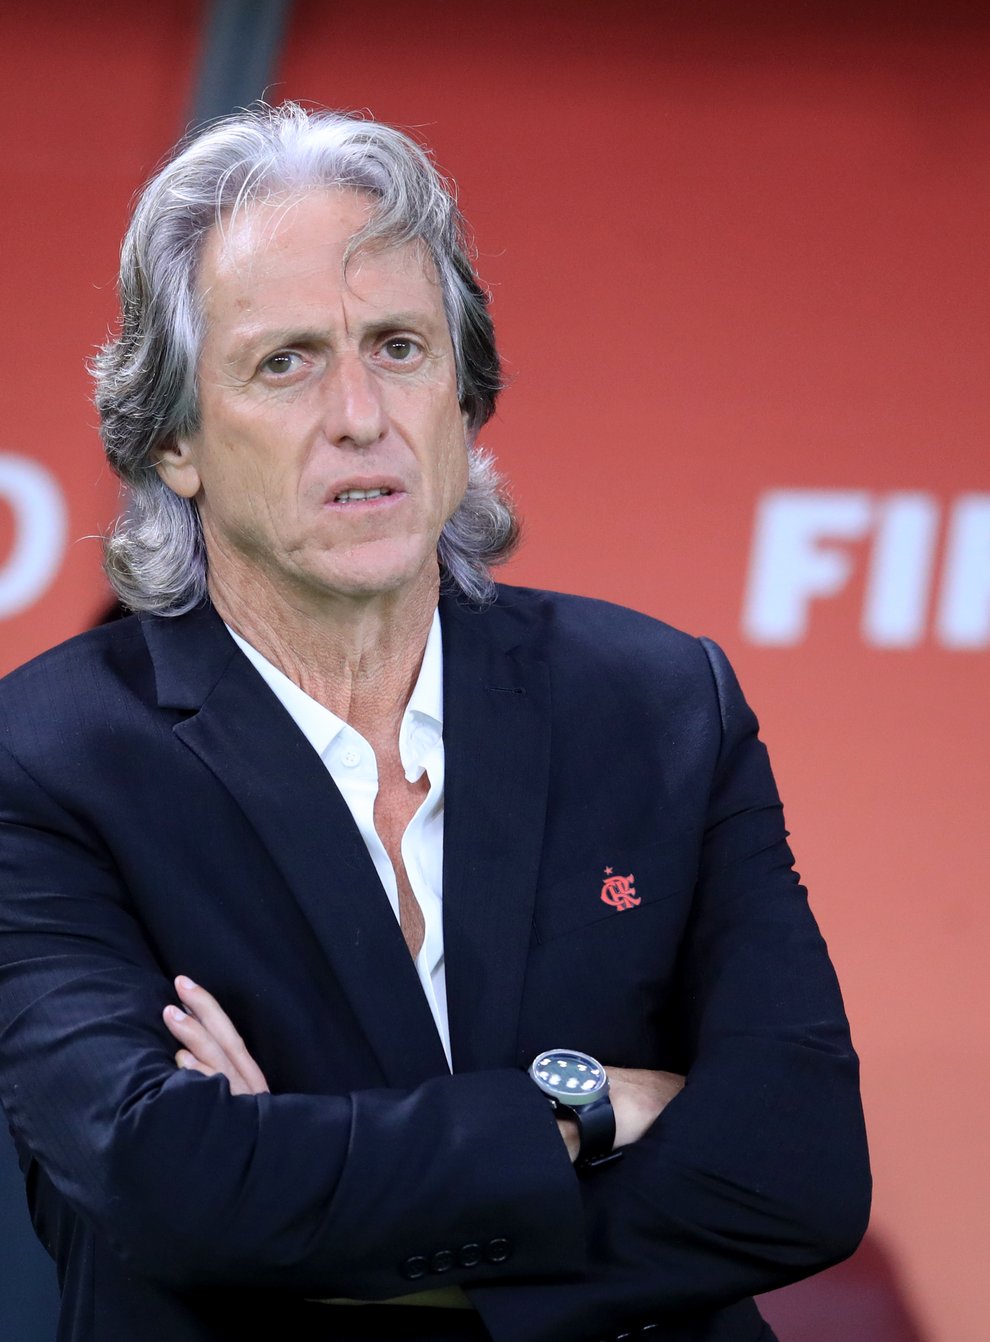 Benfica coach Jorge Jesus has Covid concerns ahead of facing Rangers